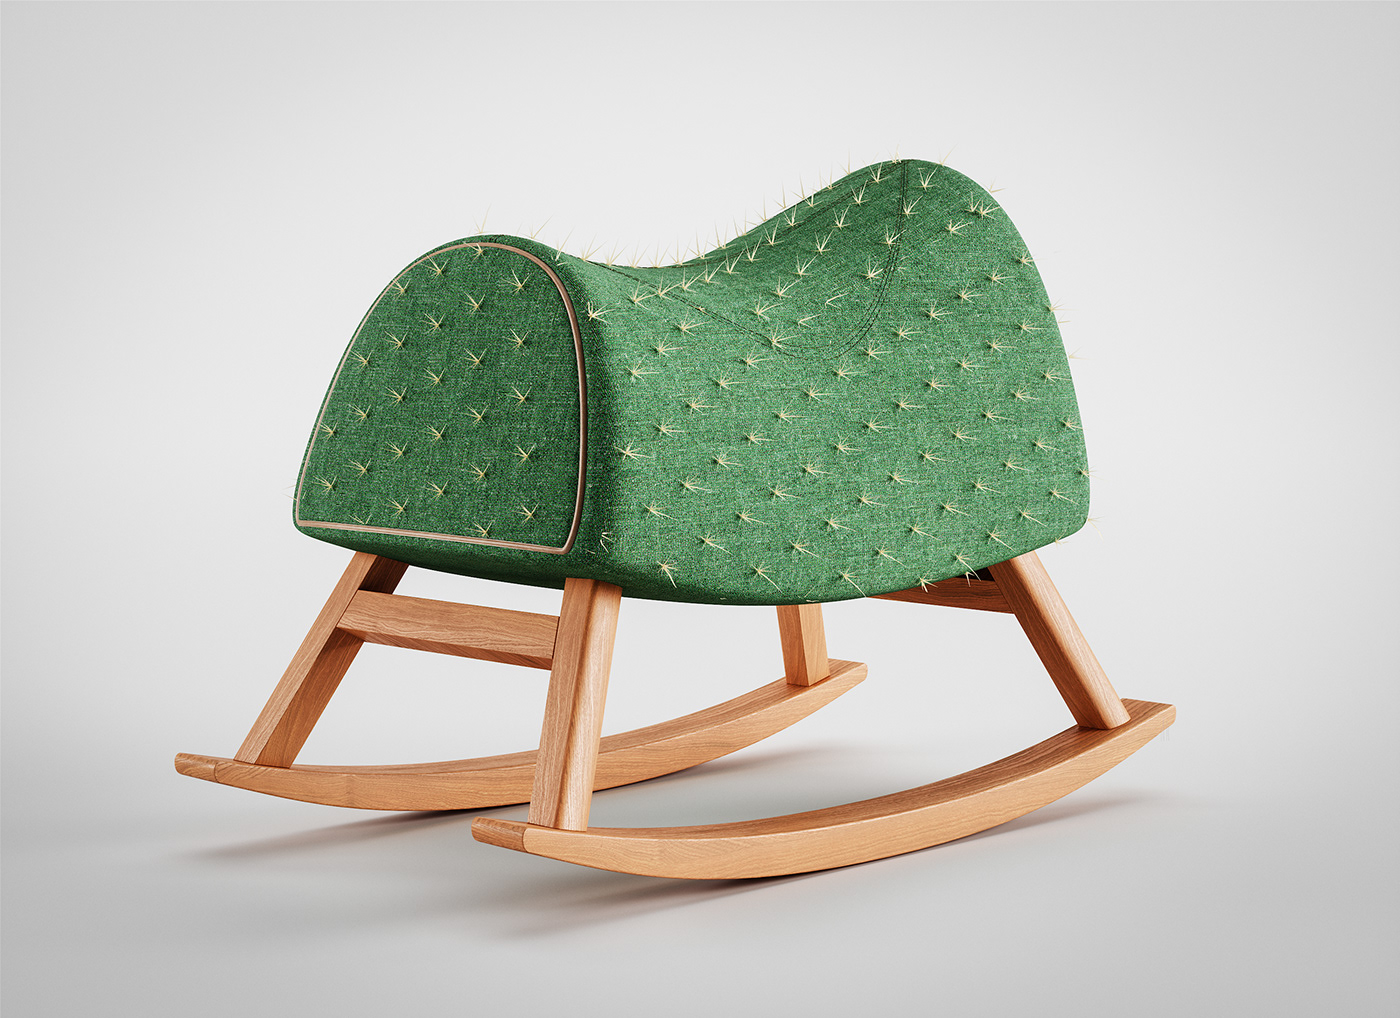 3ds max banco banco sela Big Brother cactus product Product Rendering Render rendering seat